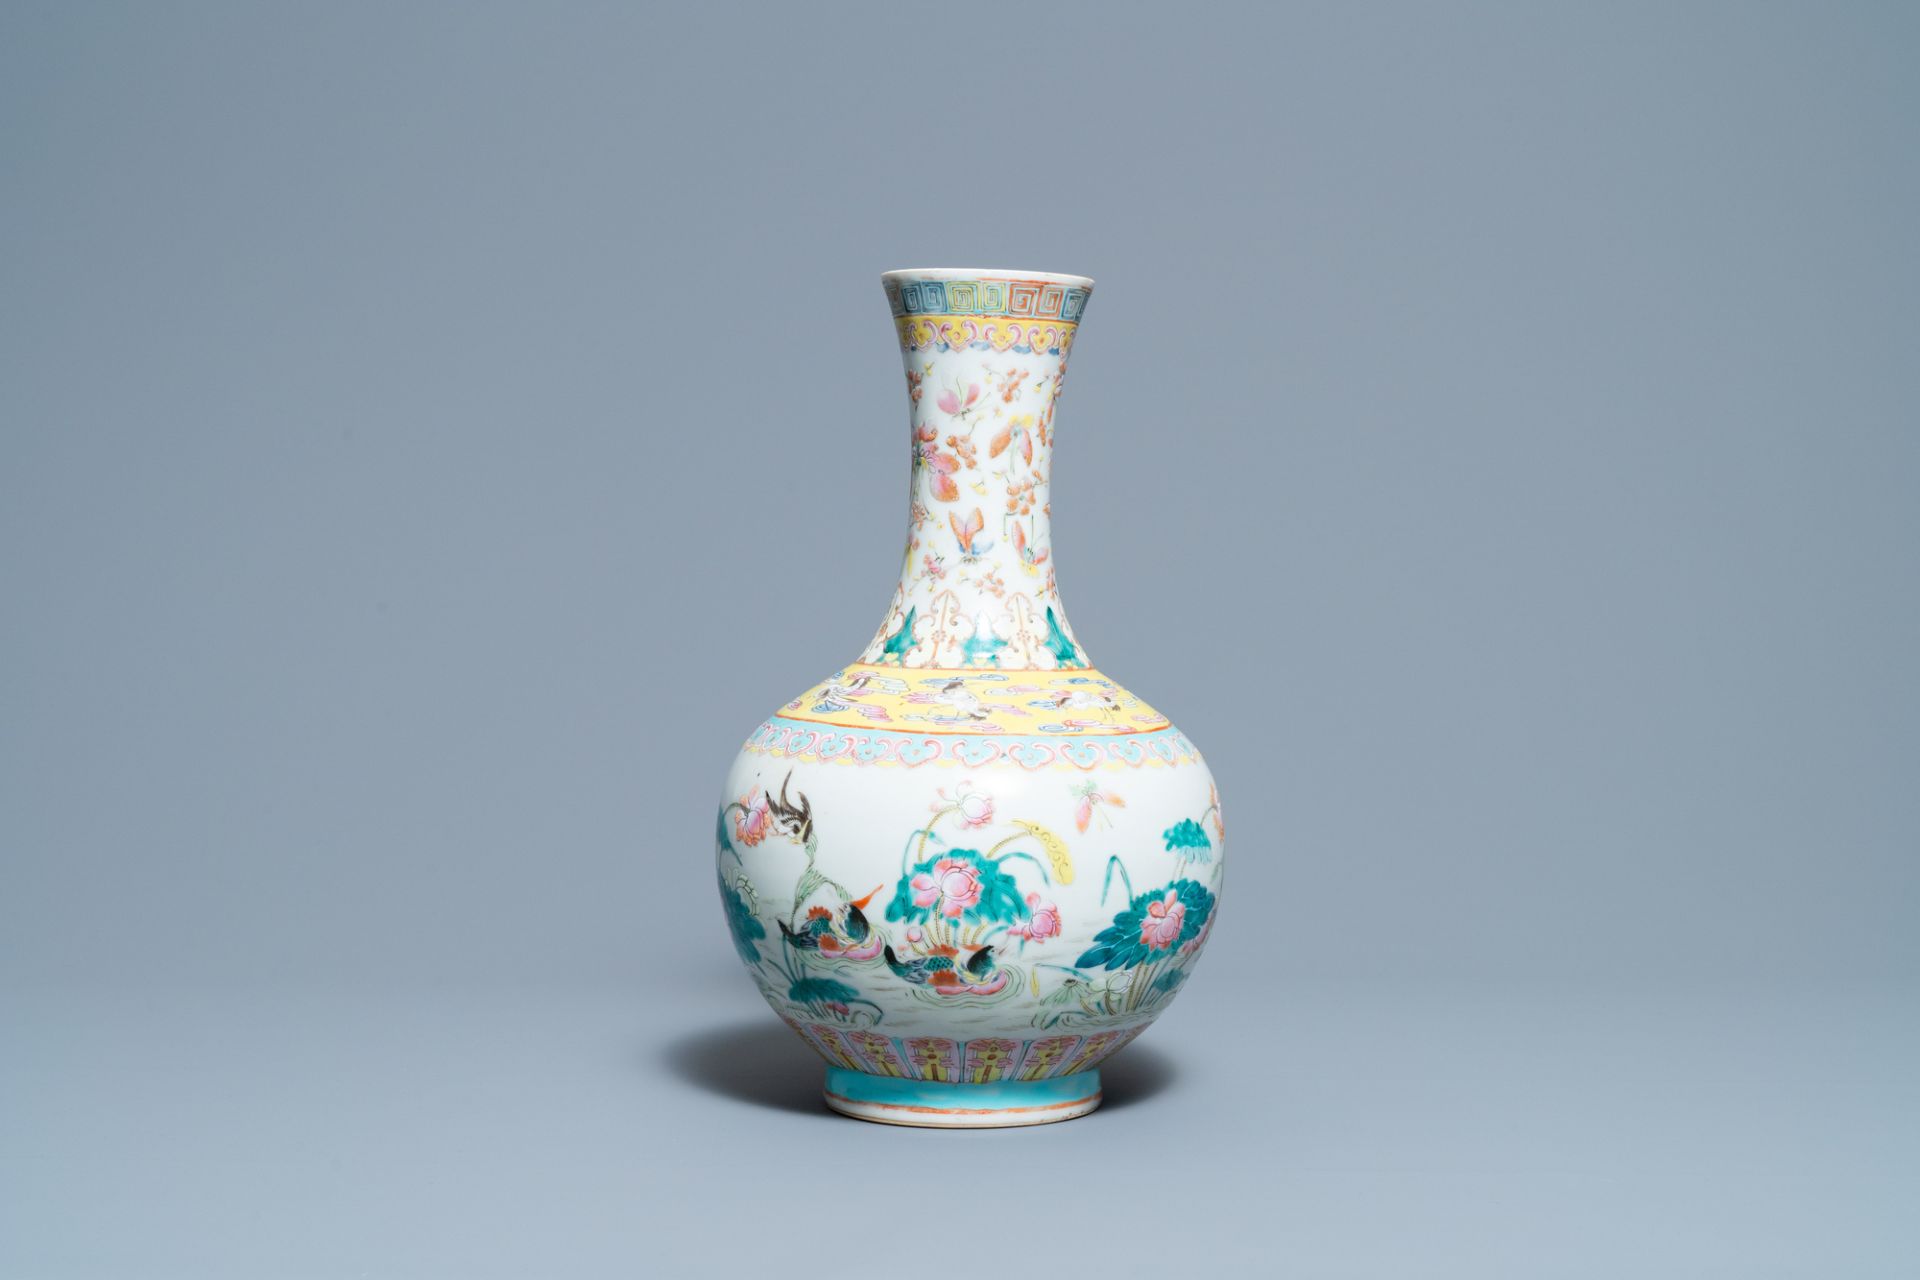 A Chinese famille rose bottle vase with mandarin ducks in a lotus pond, 19th C. - Image 4 of 6